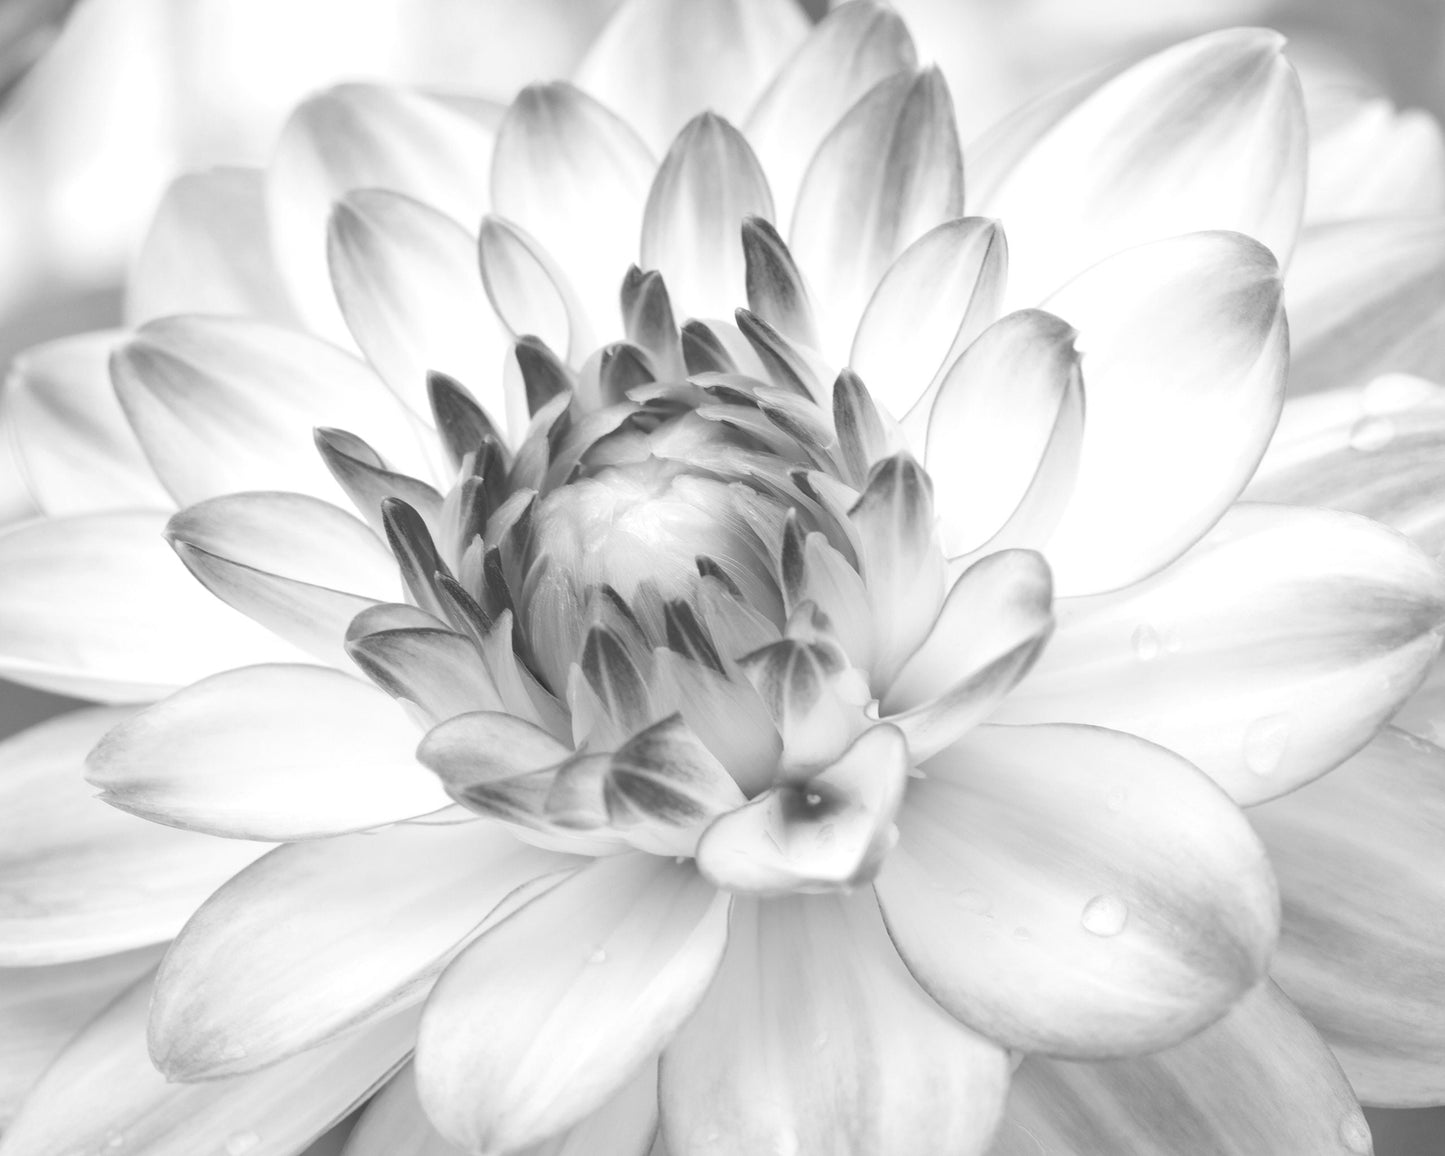 Dahlia wall art, black and white flower print, Dahlia photo, floral art, flower decor, photography, large canvas picture, 5x7 8x10 to 32x48"